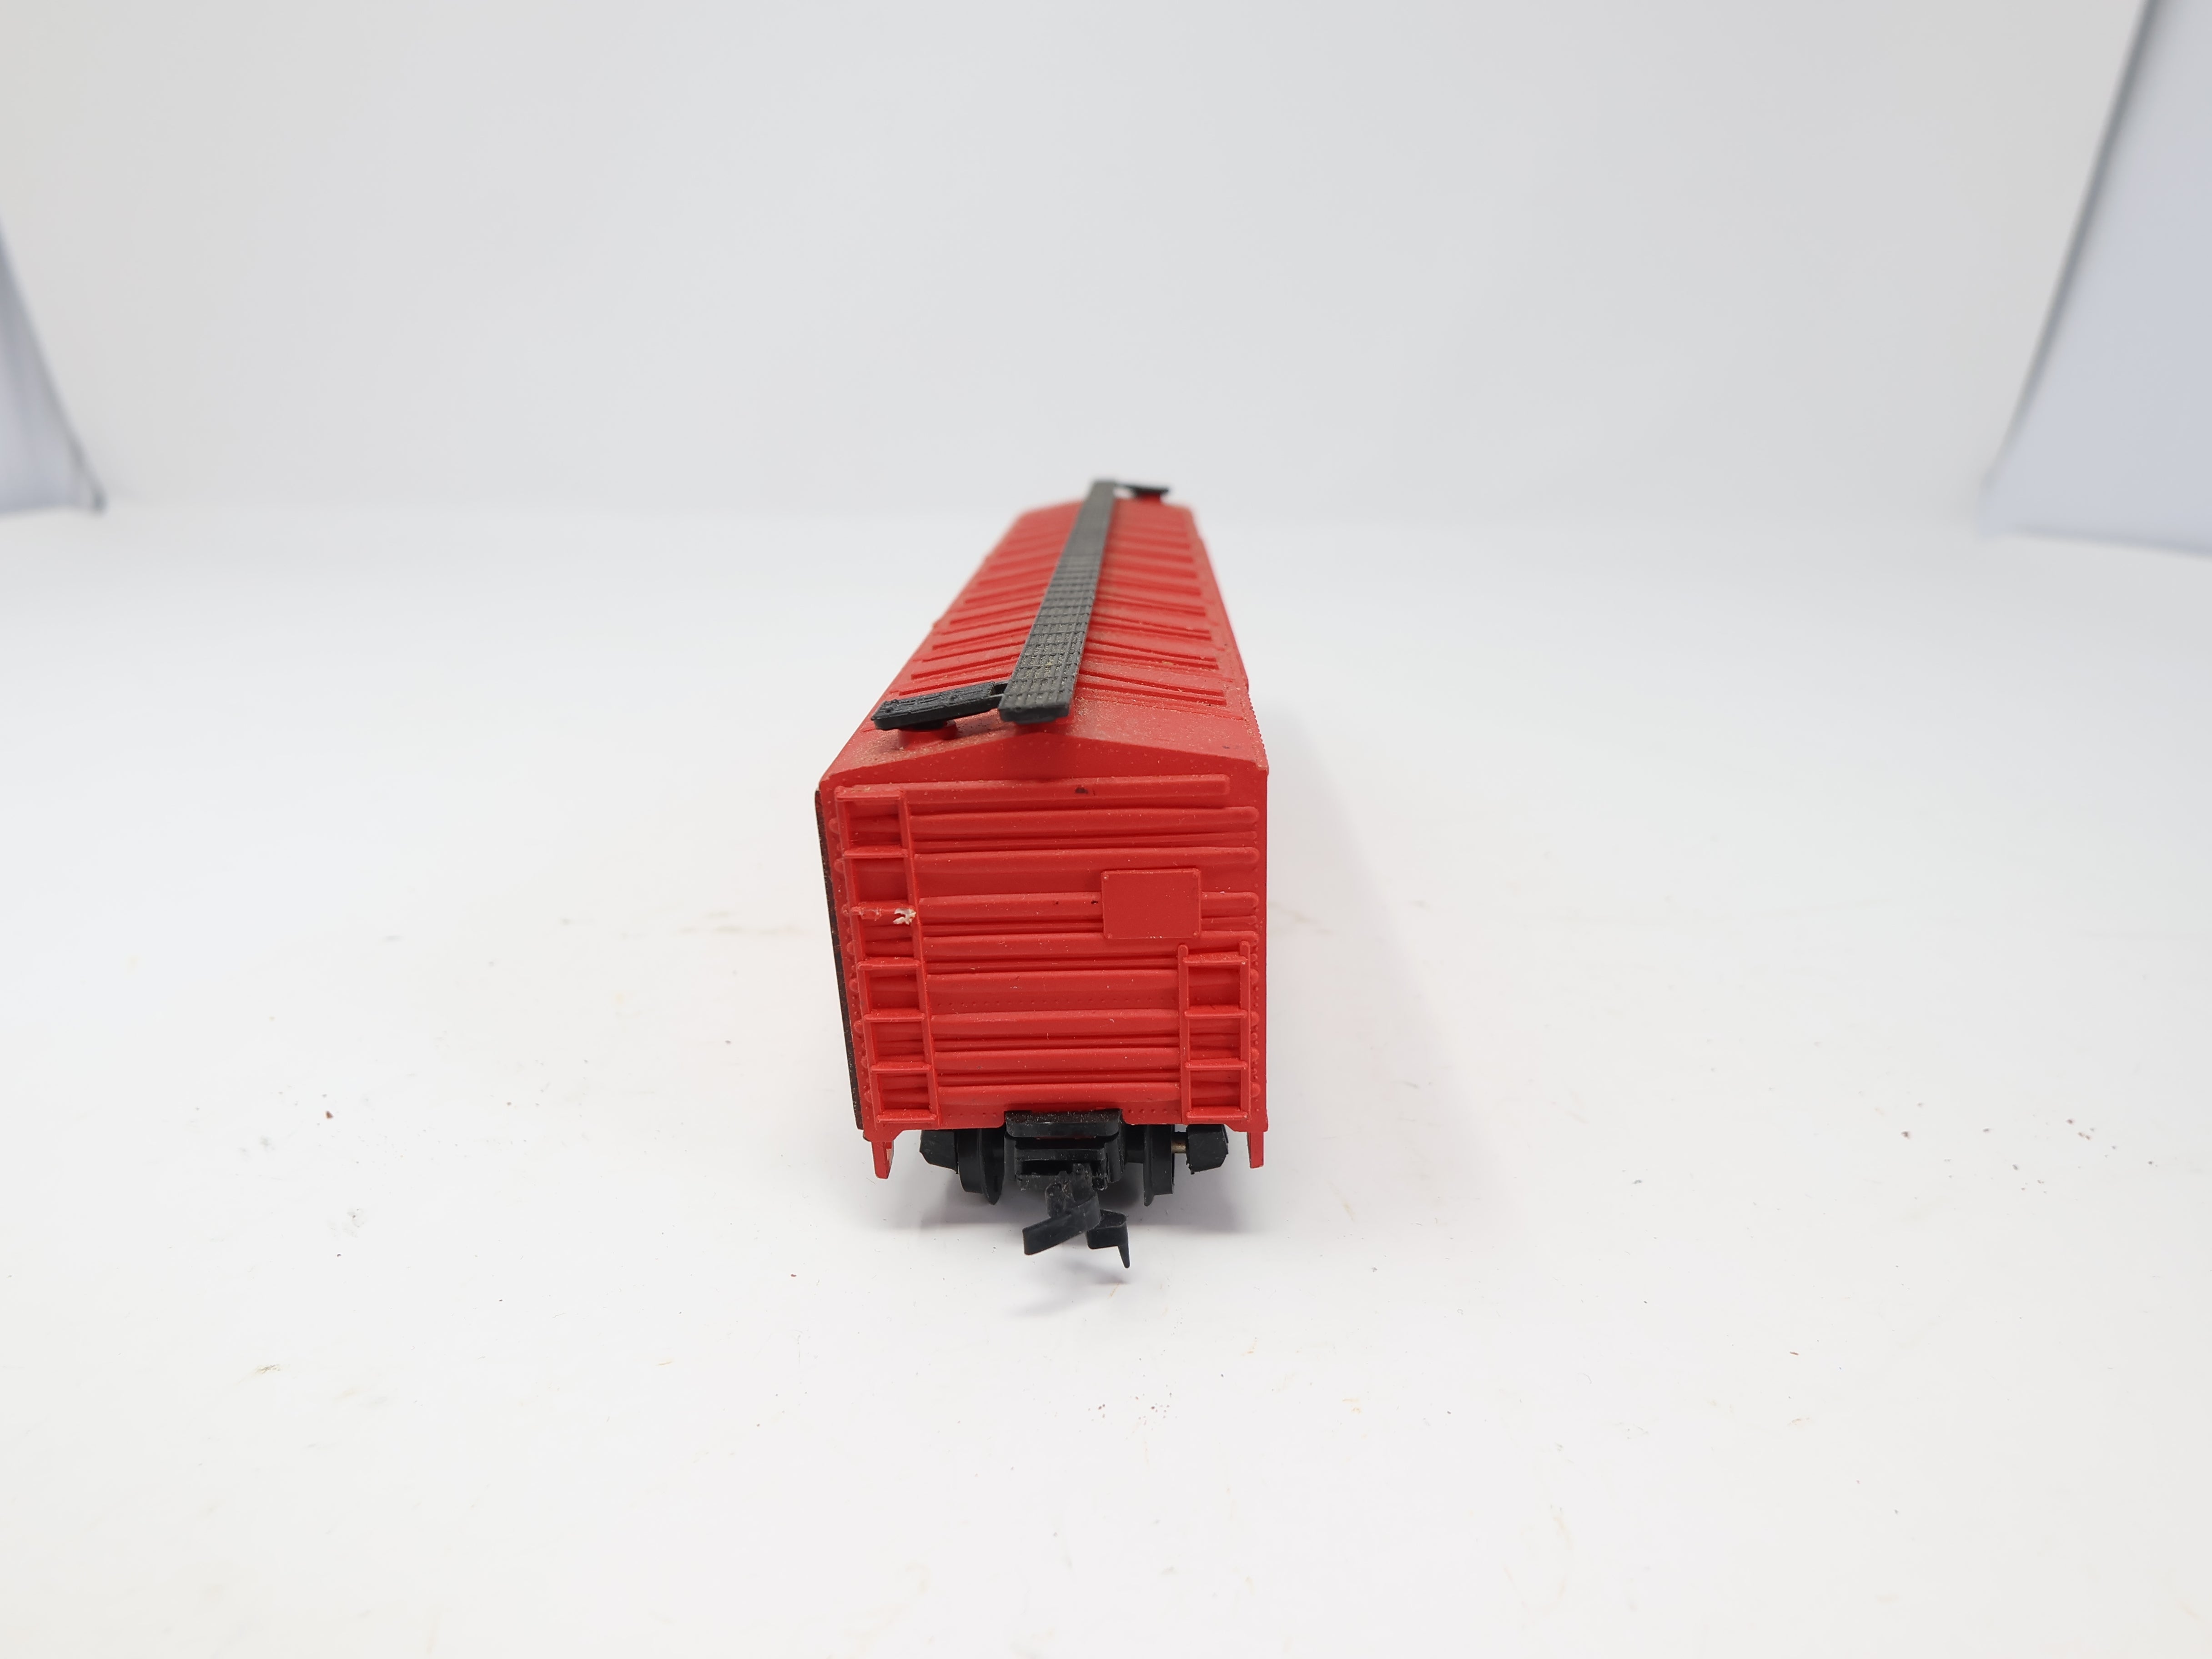 USED AHM HO Scale, 50' Steel Box Car, Canadian Pacific CP #51031, CP Rail